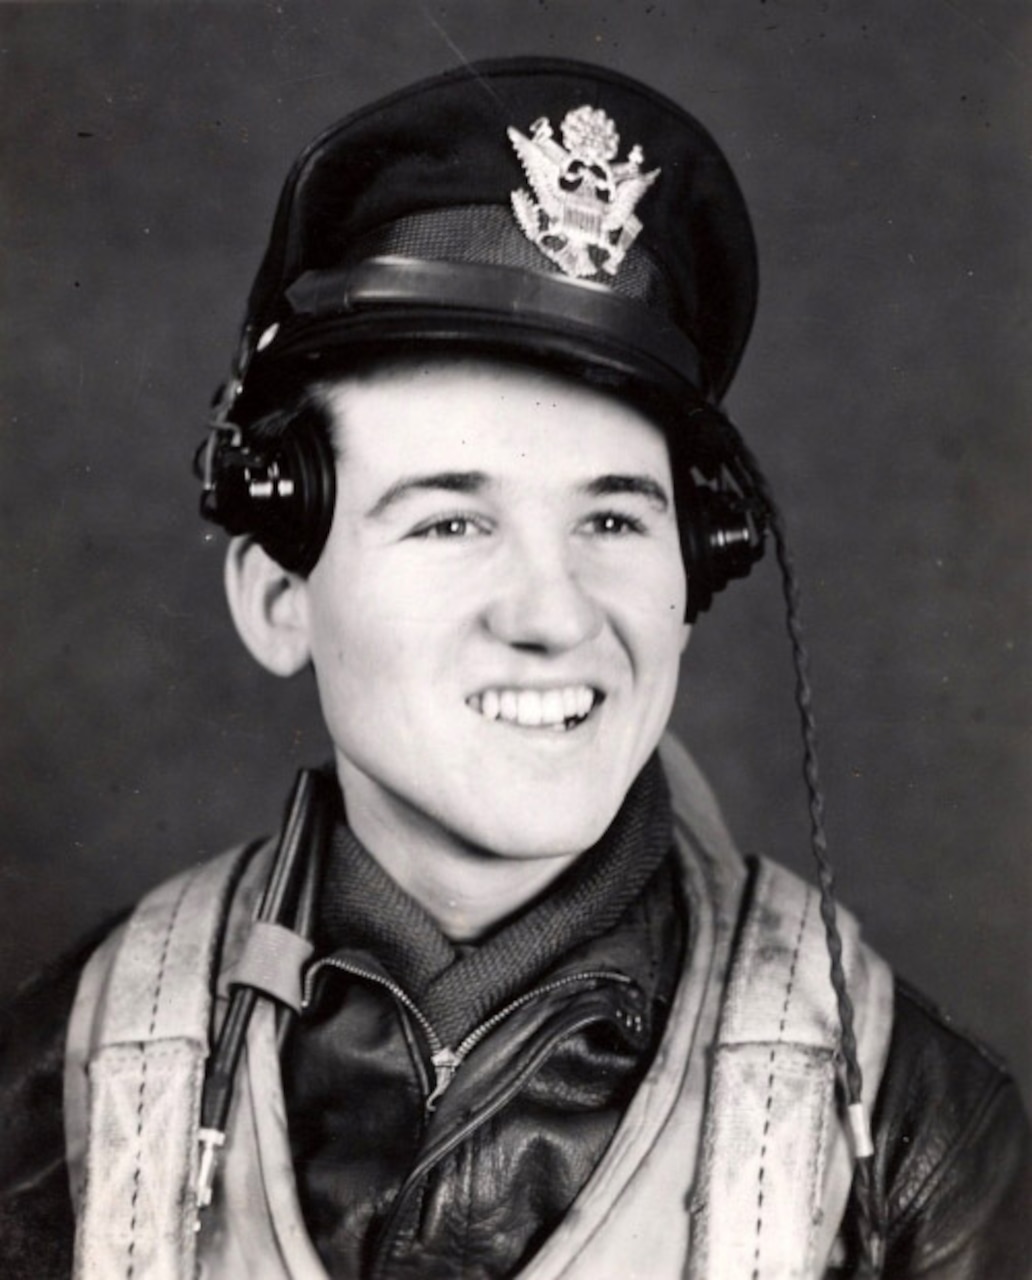 A young man wearing a cap, uniform and askew headphones smiles broadly as he poses for a black-and-white photo.